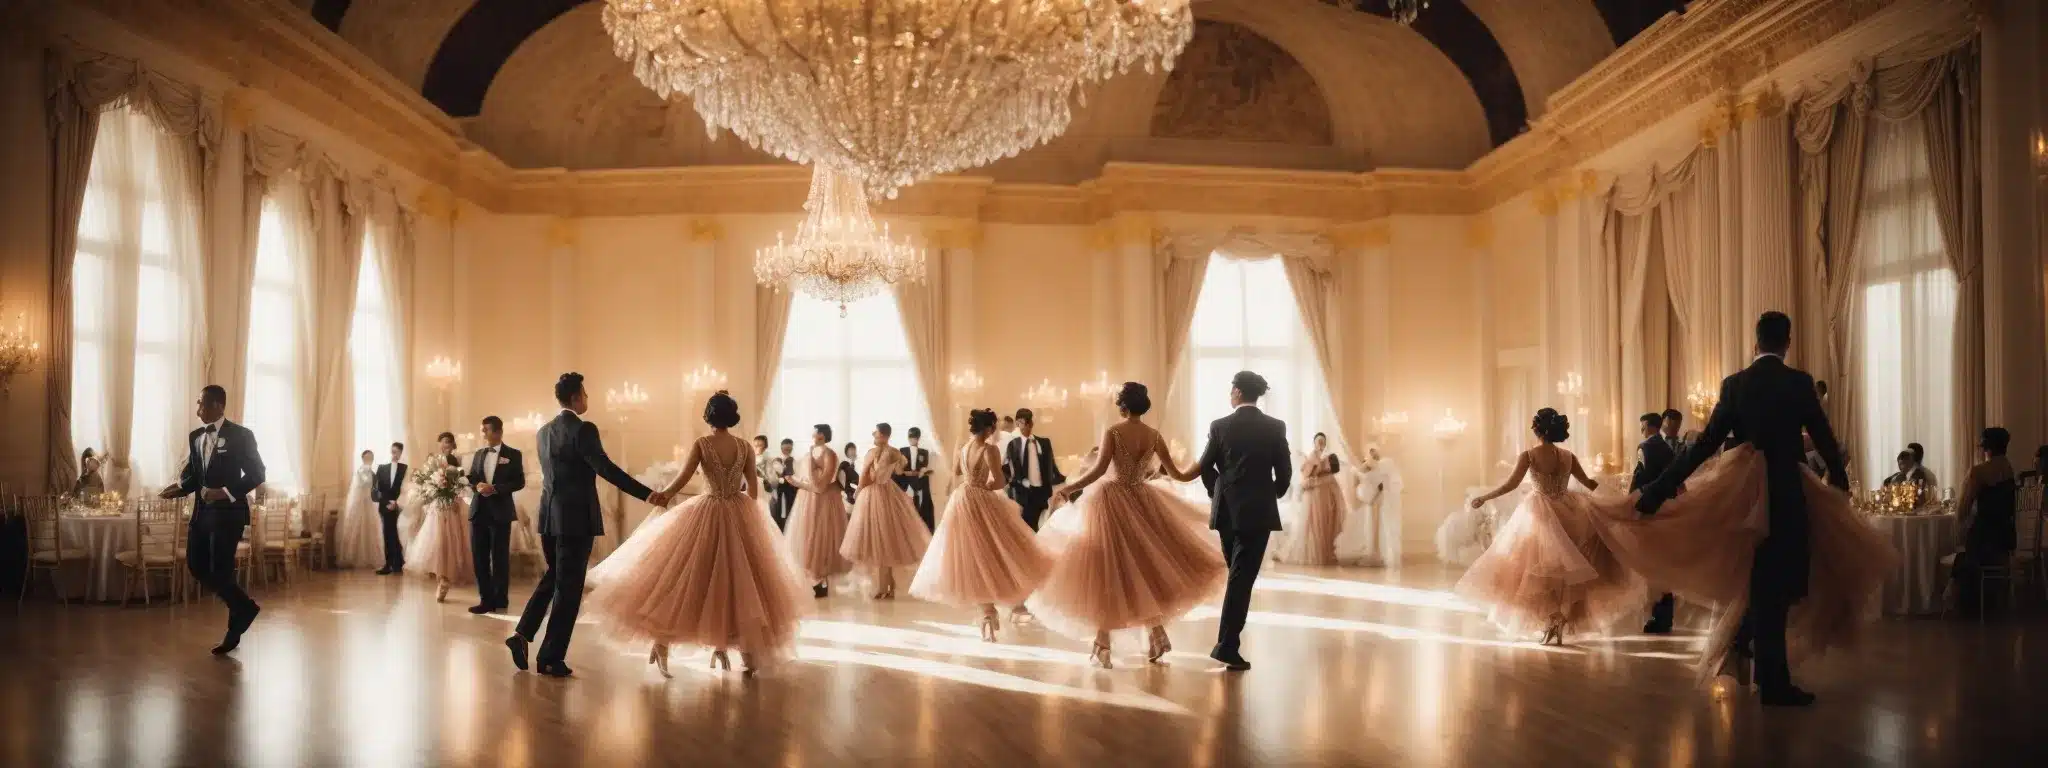 A Luxurious Ballroom With Dancers Gracefully Gliding Across The Polished Floor Under The Bright Glow Of An Elegant Chandelier.